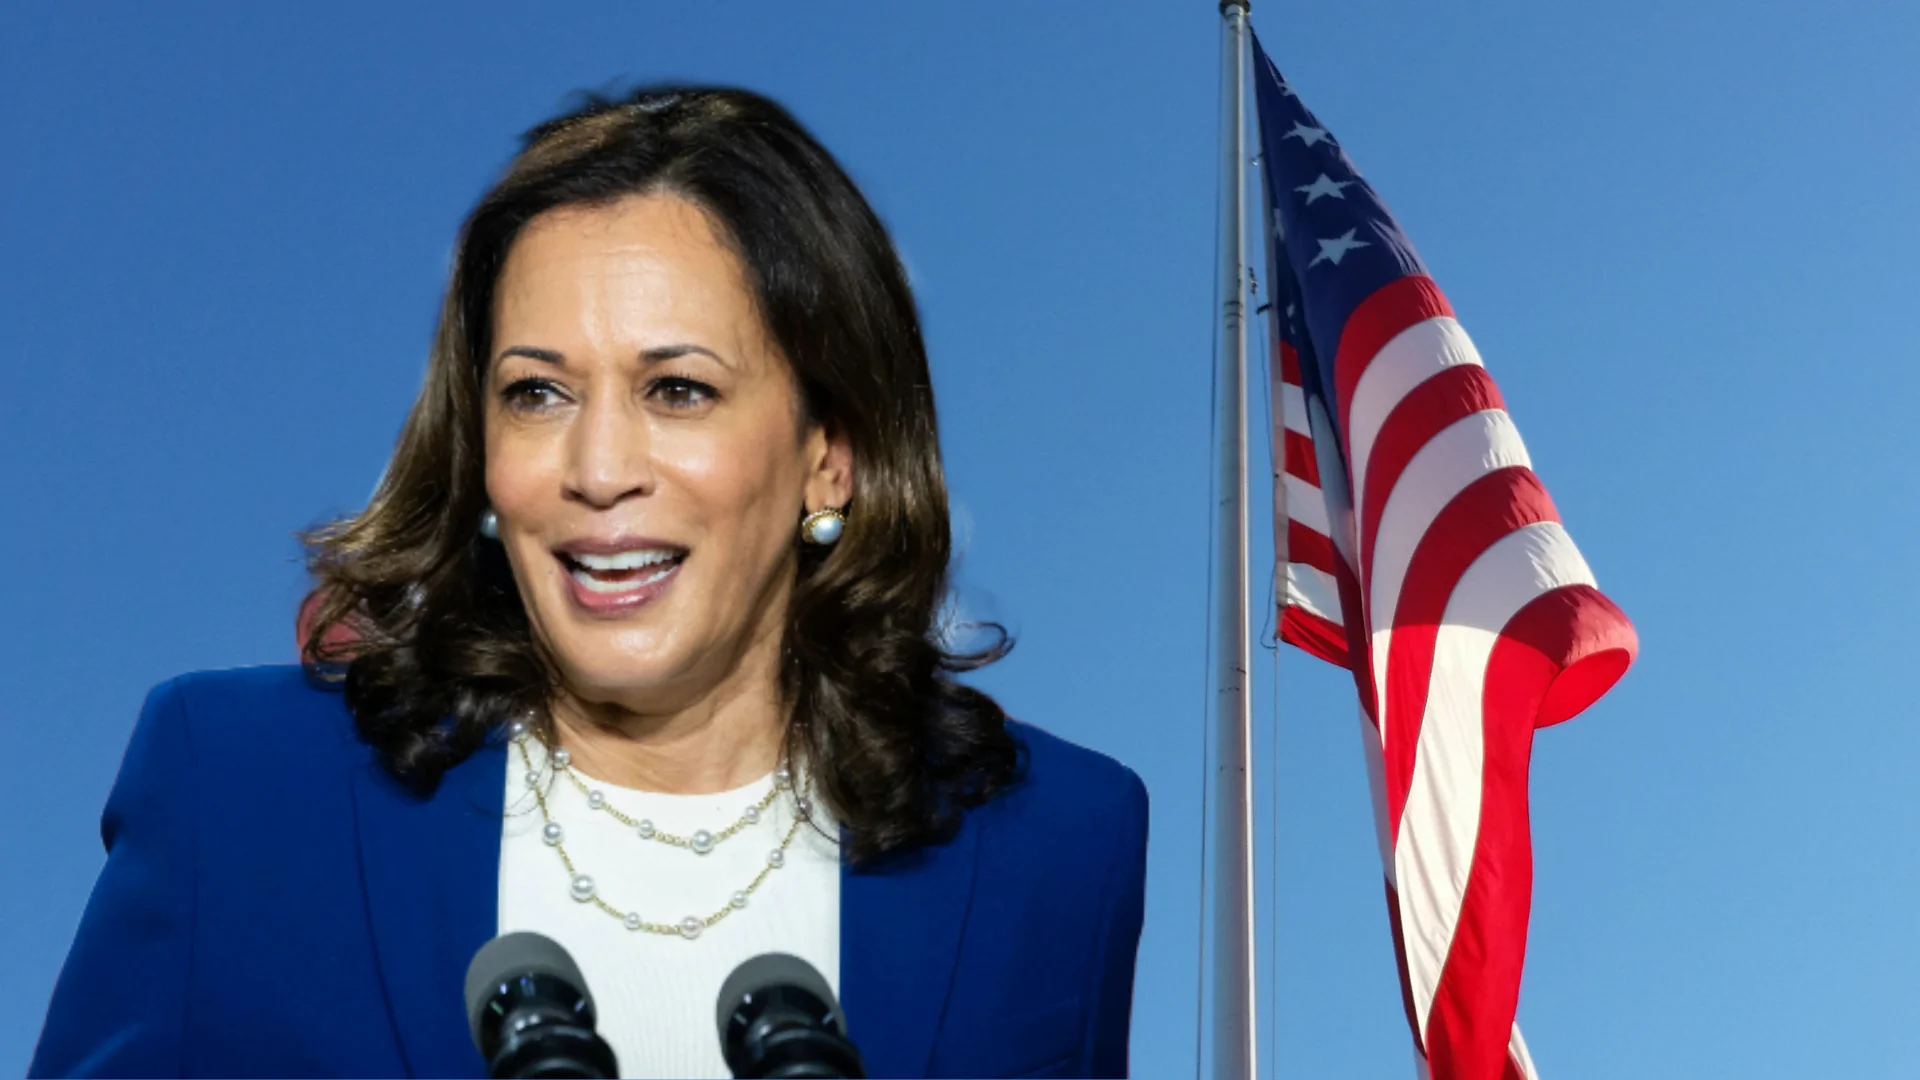 Kamala Harris breaks this US Senate record, which has stood for 101 years